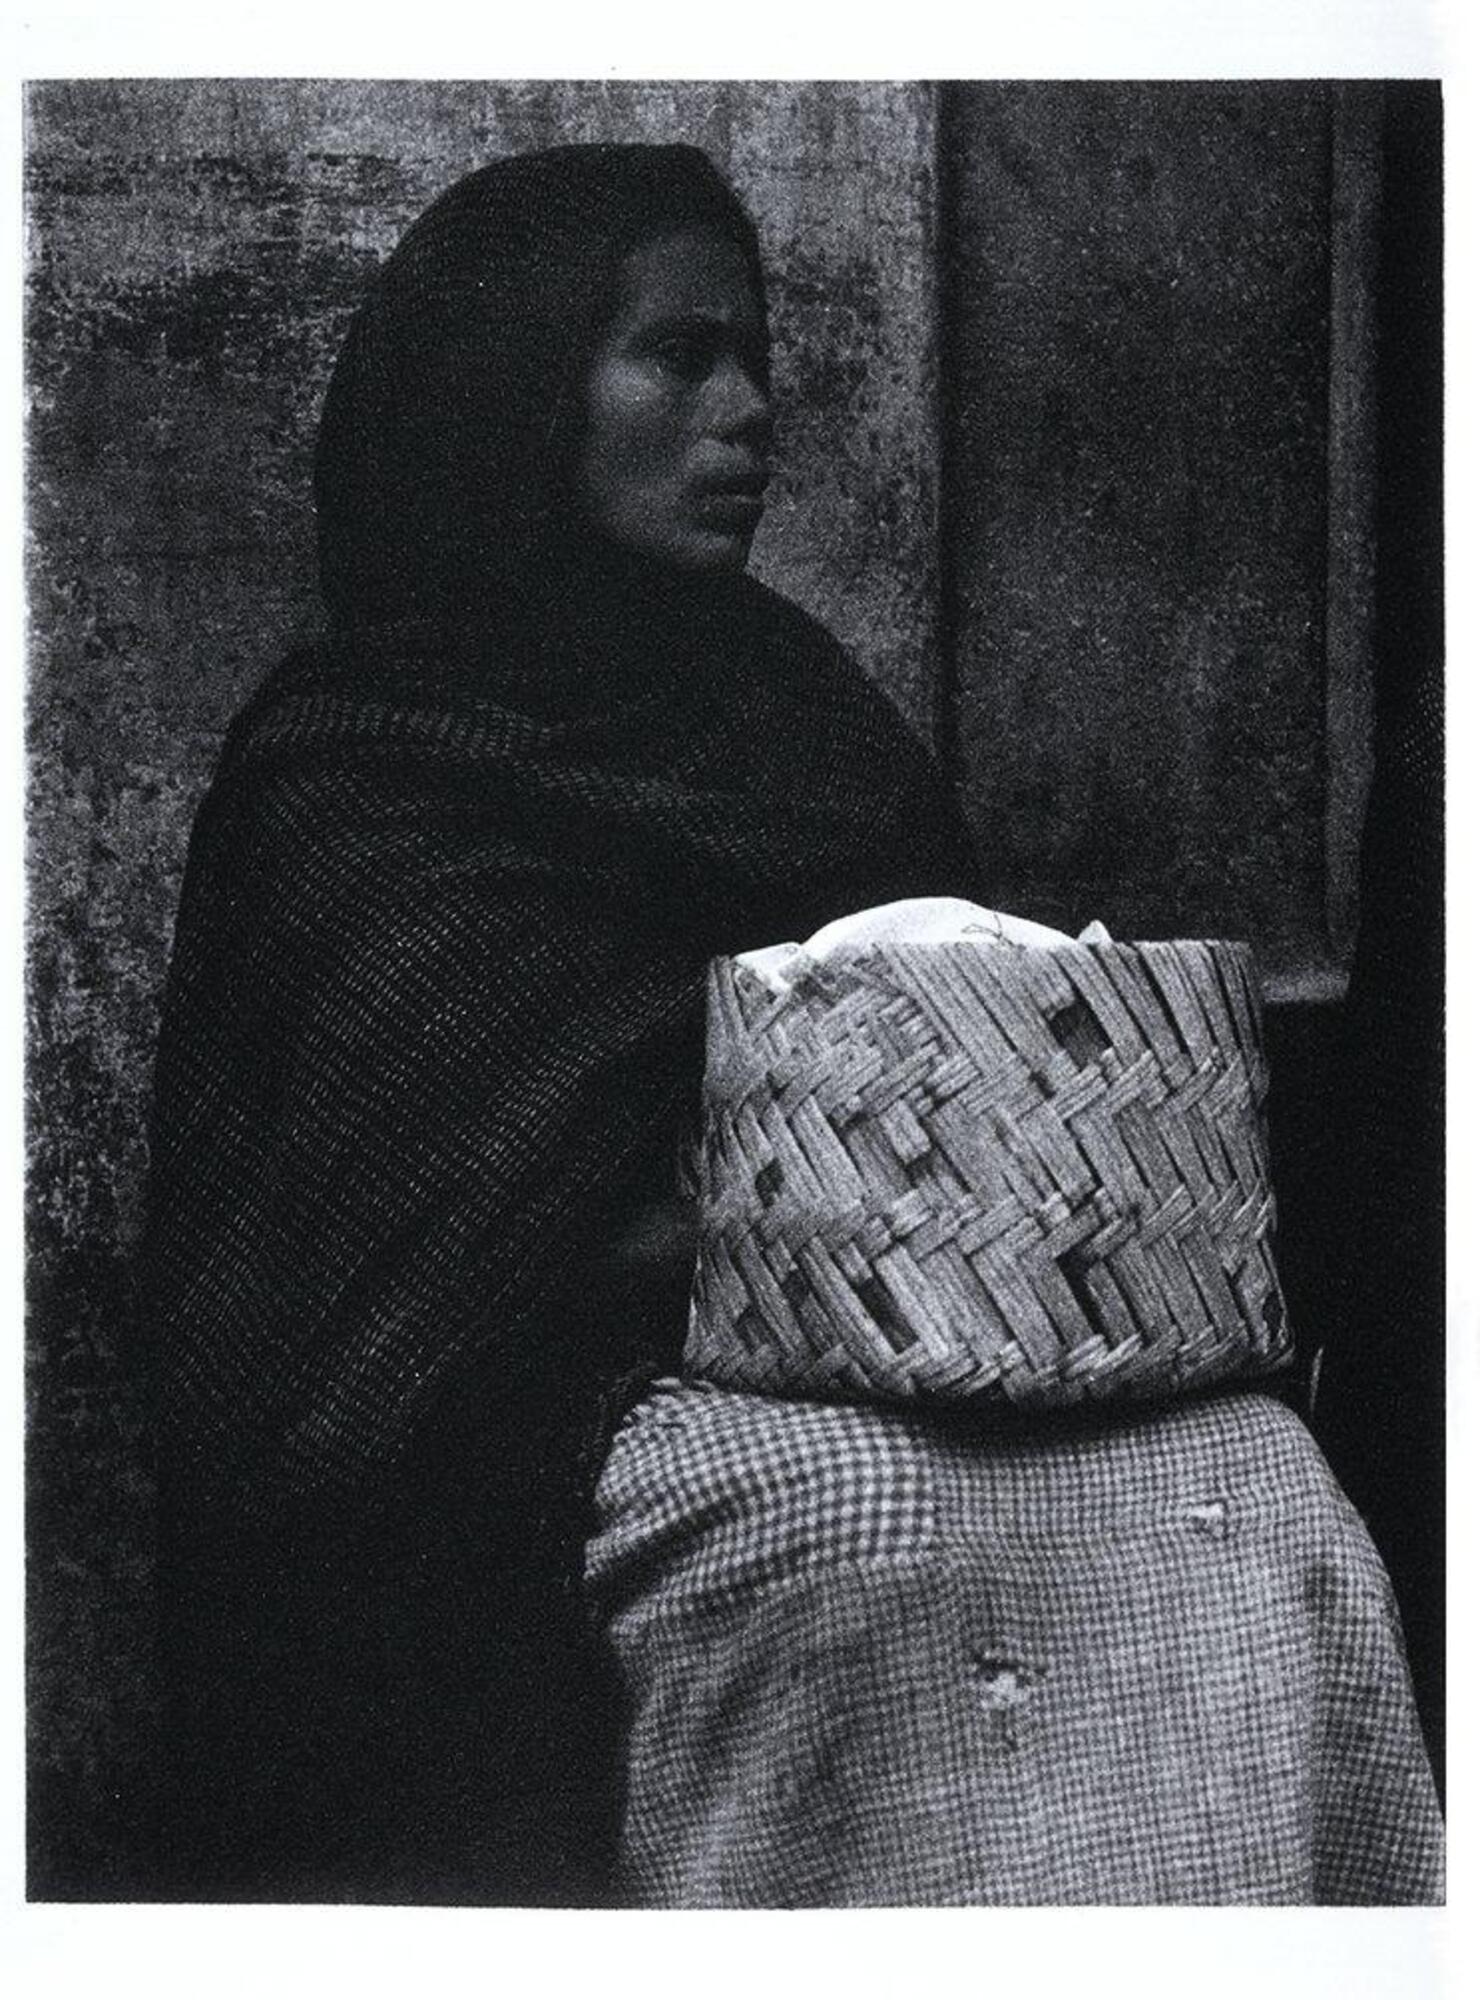 This is a photograph of a woman in Patzcuaro, Mexico. The woman sits with a headscarf draped over her head and shoulders and a basket on her lap.